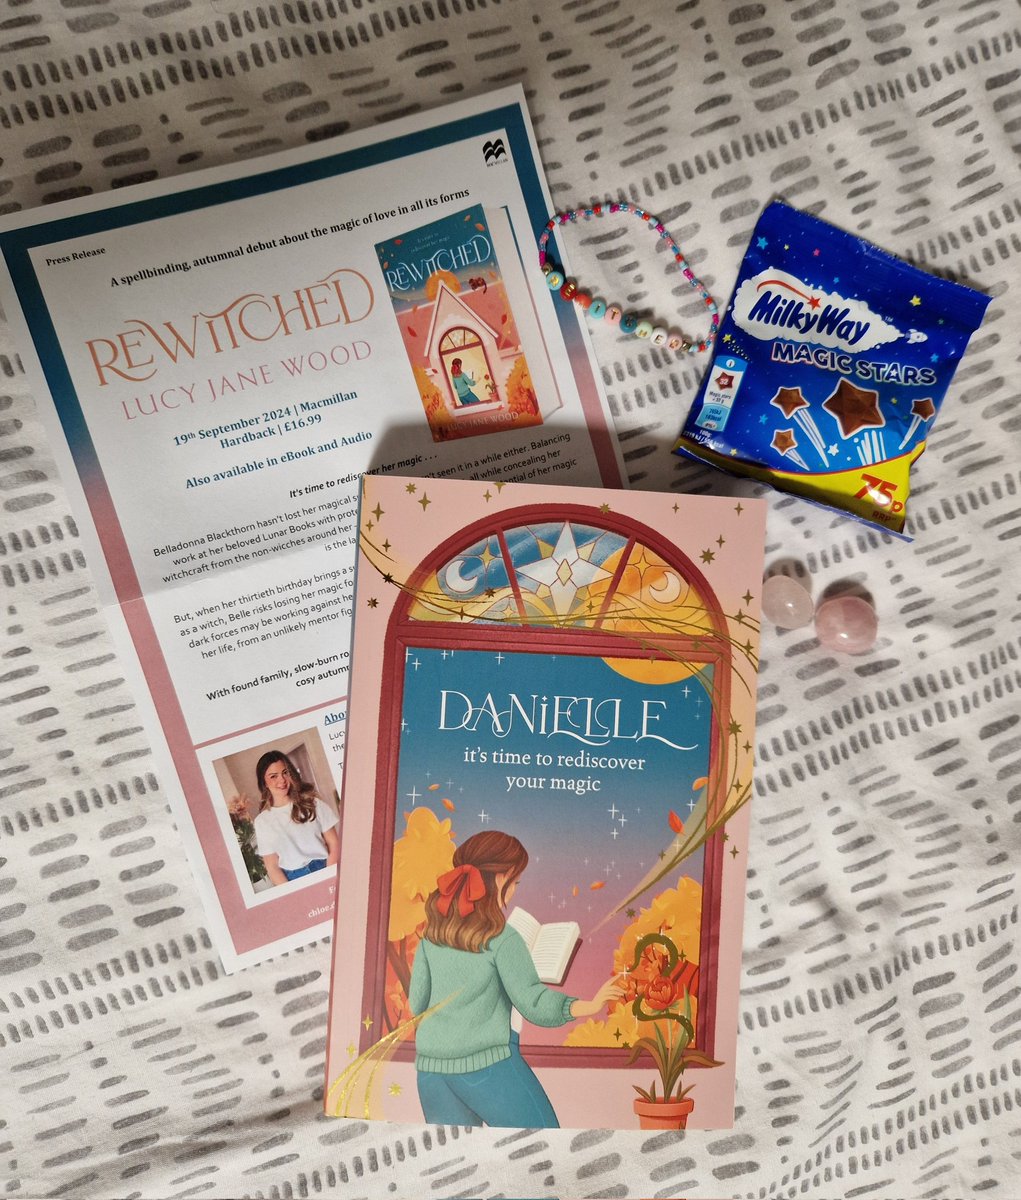 It's what you've been waiting for! This bewitching proof PR drop from the fab team at @panmacmillan, @chlodavies97 & co for @LucyJaneWood's September #Debut #Rewitched ✨️ I feel special, and this book is special, so match made in magic 🩷 I'll be reviewing in @TheDebutDigest!